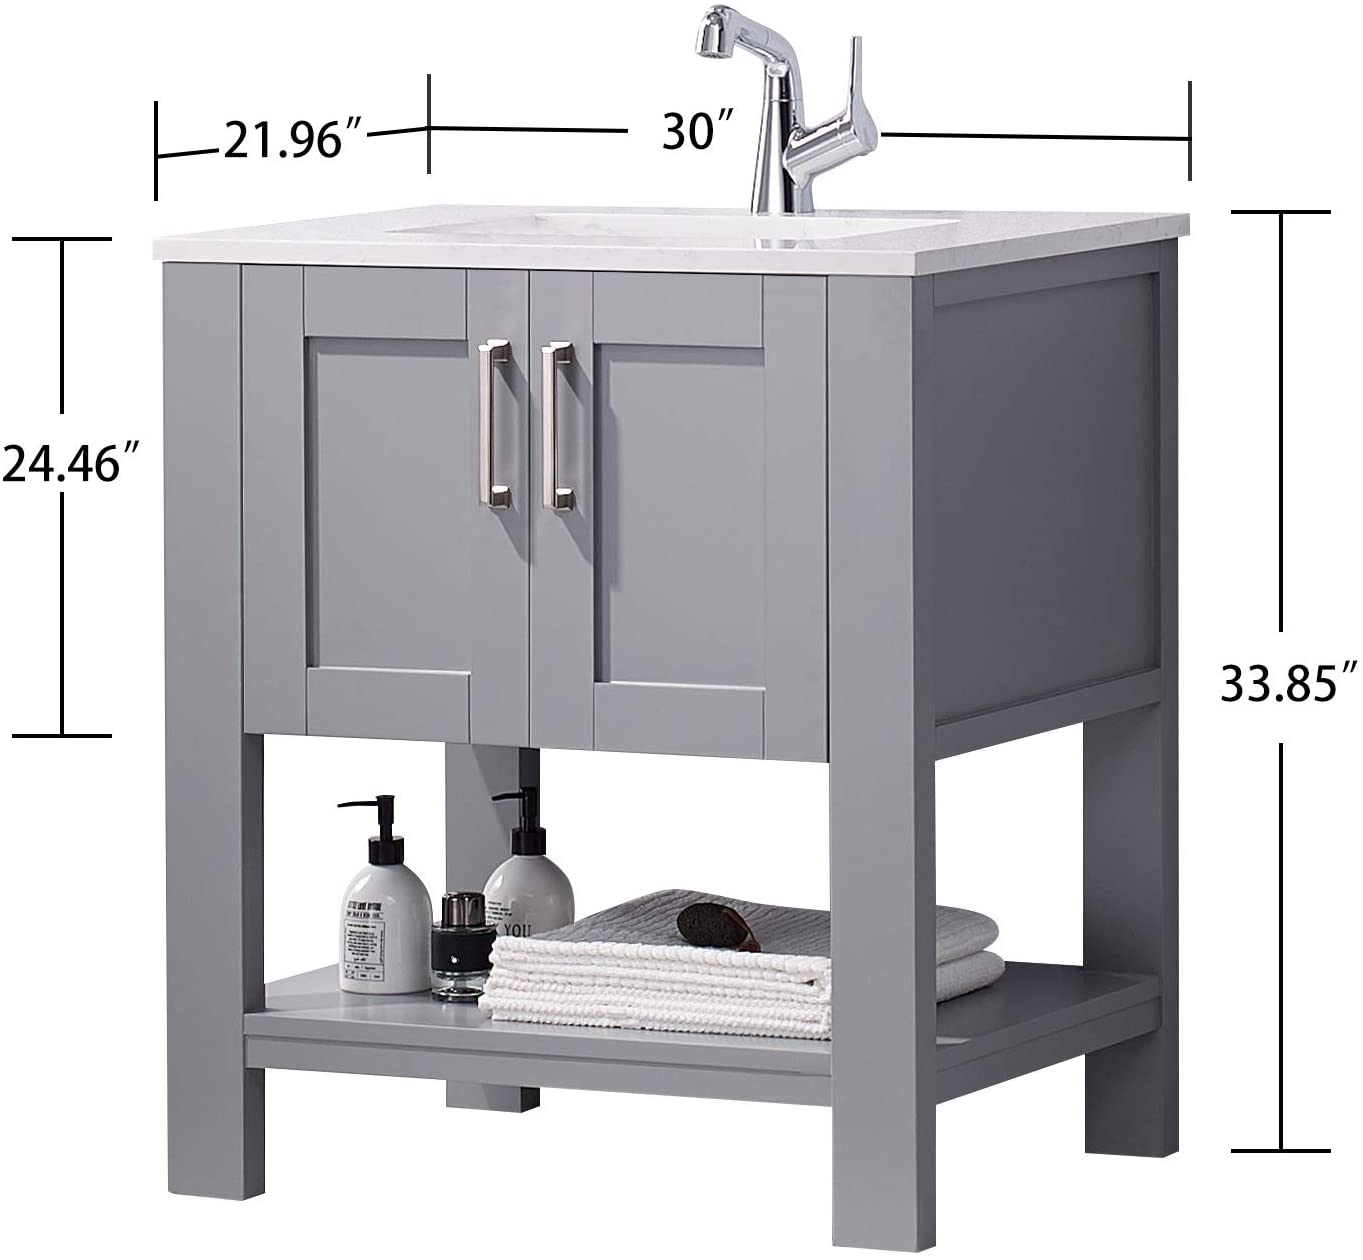 FR Gray Bathroom Vanity, 30 Inch with Marble Countertop and White Ceramic Sink